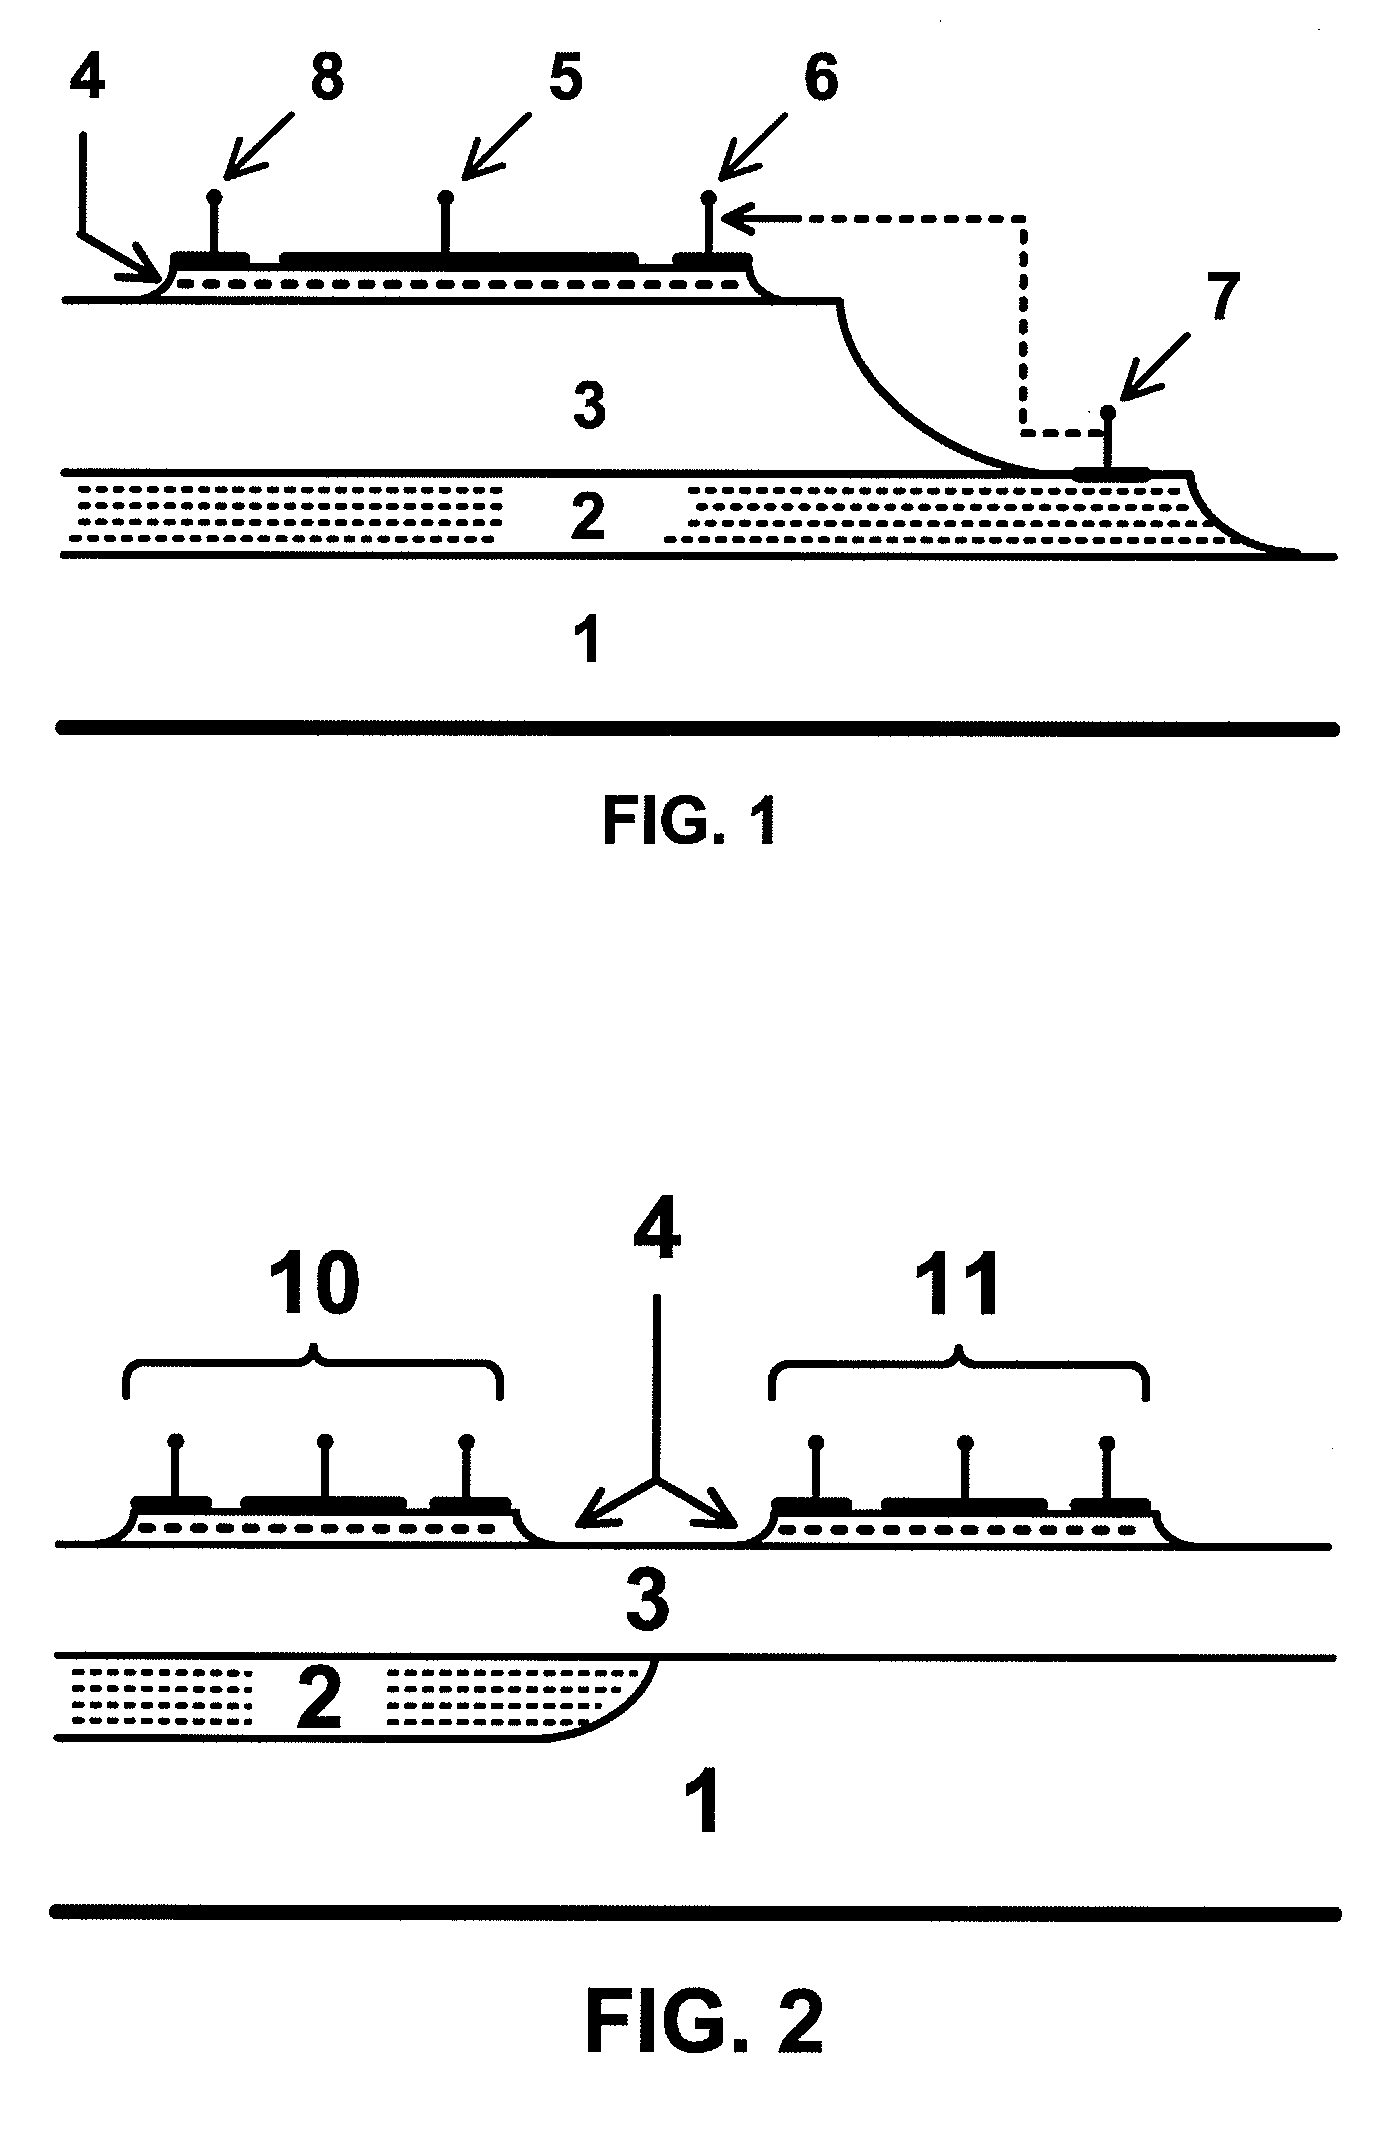 Method to reduce excess noise in electronic devices and monolithic integrated circuits